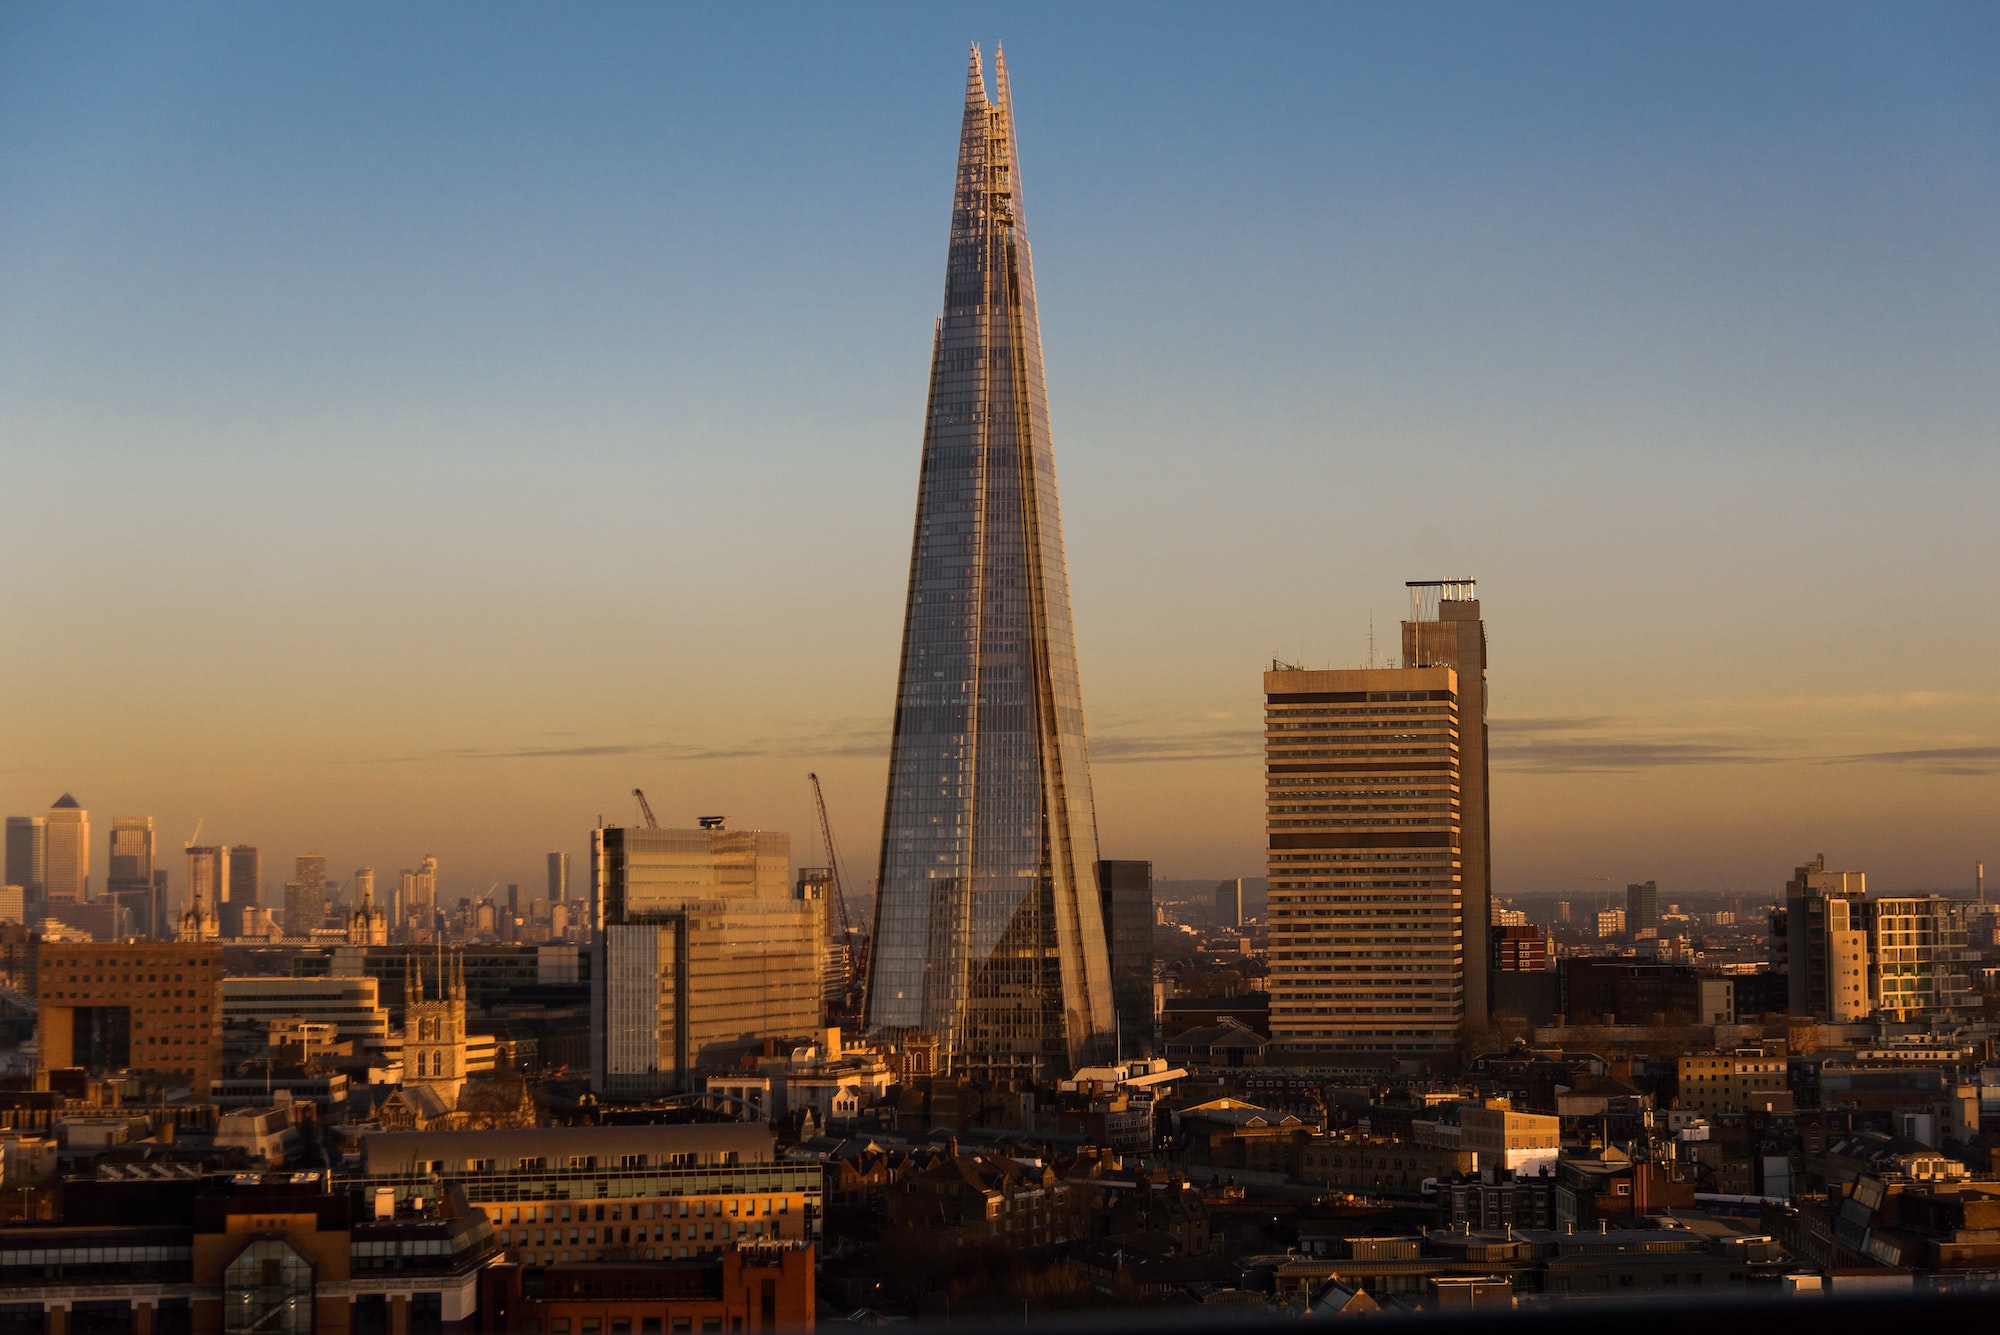 Buying London Real Estate? Here are Some Factors to Consider